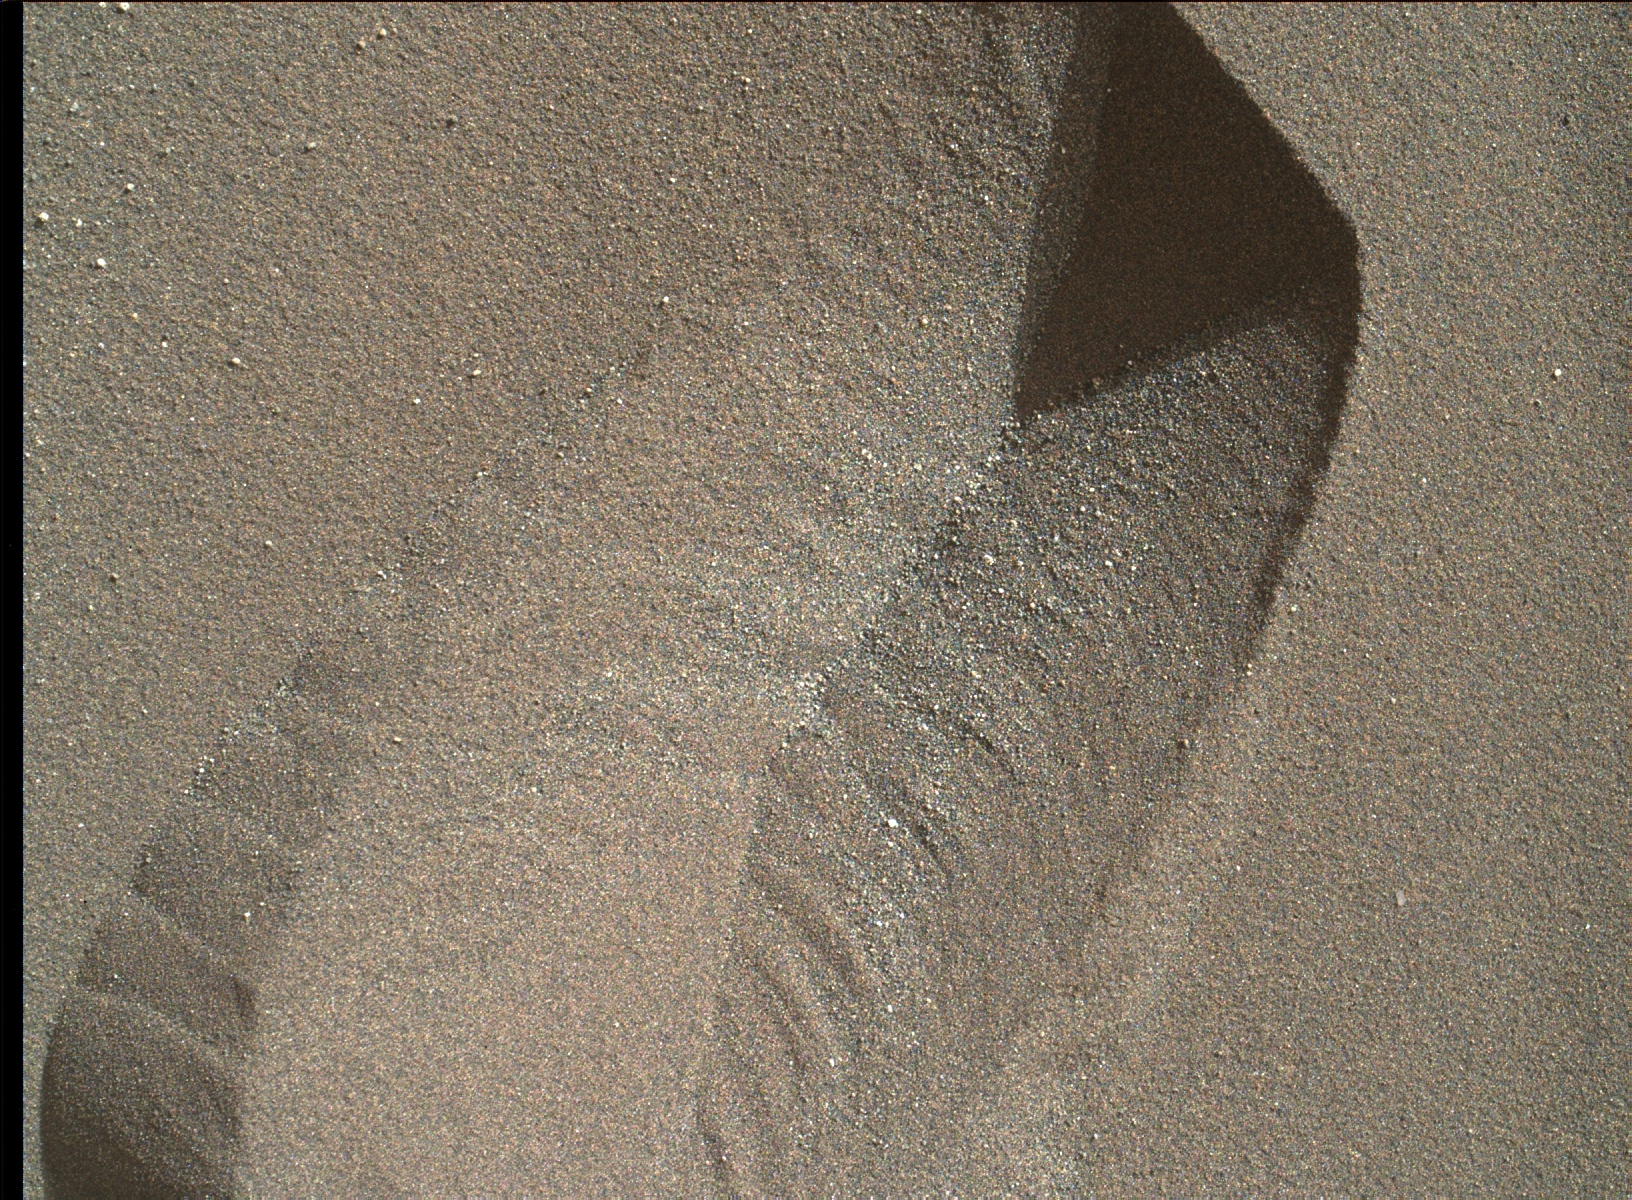 Nasa's Mars rover Curiosity acquired this image using its Mars Hand Lens Imager (MAHLI) on Sol 1241